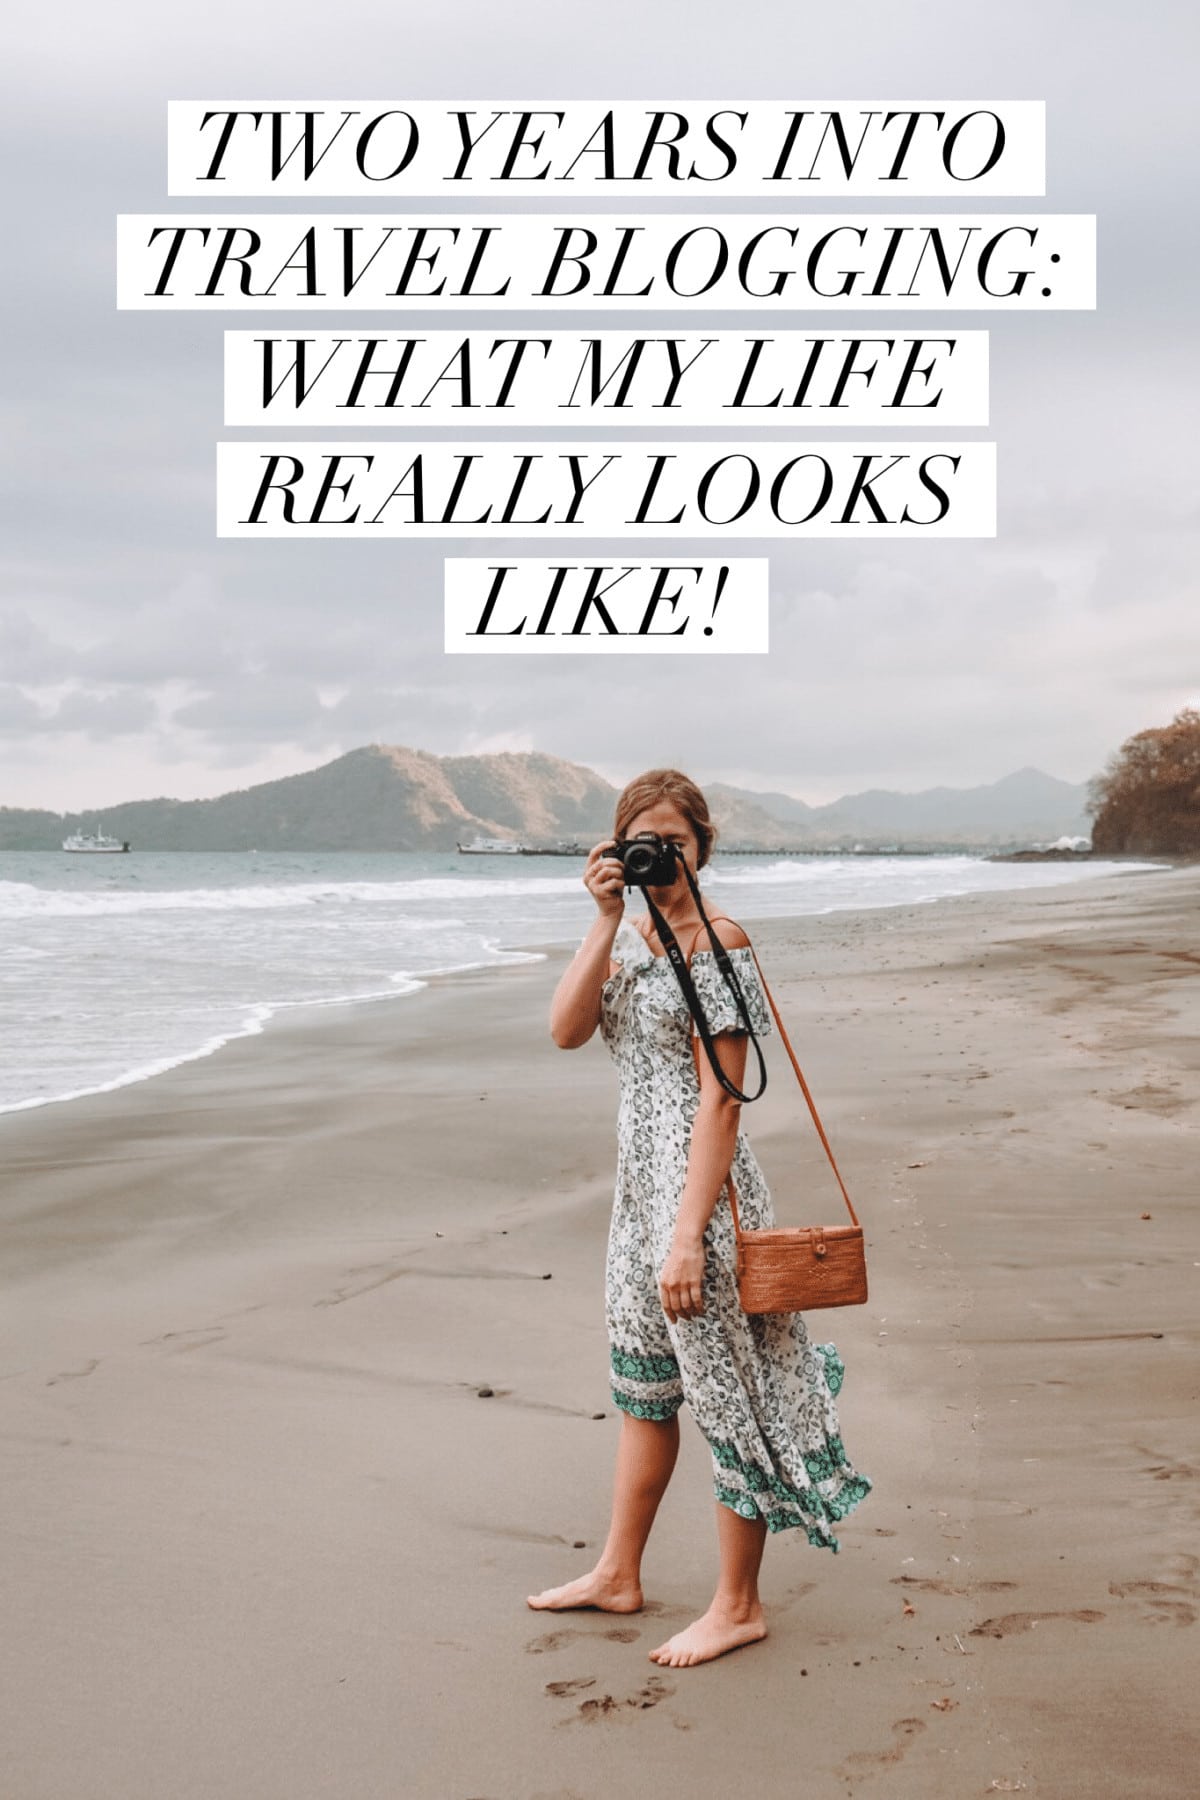 Two Years Into Travel Blogging: Lessons I've Learned and What My Life Really Looks Like!